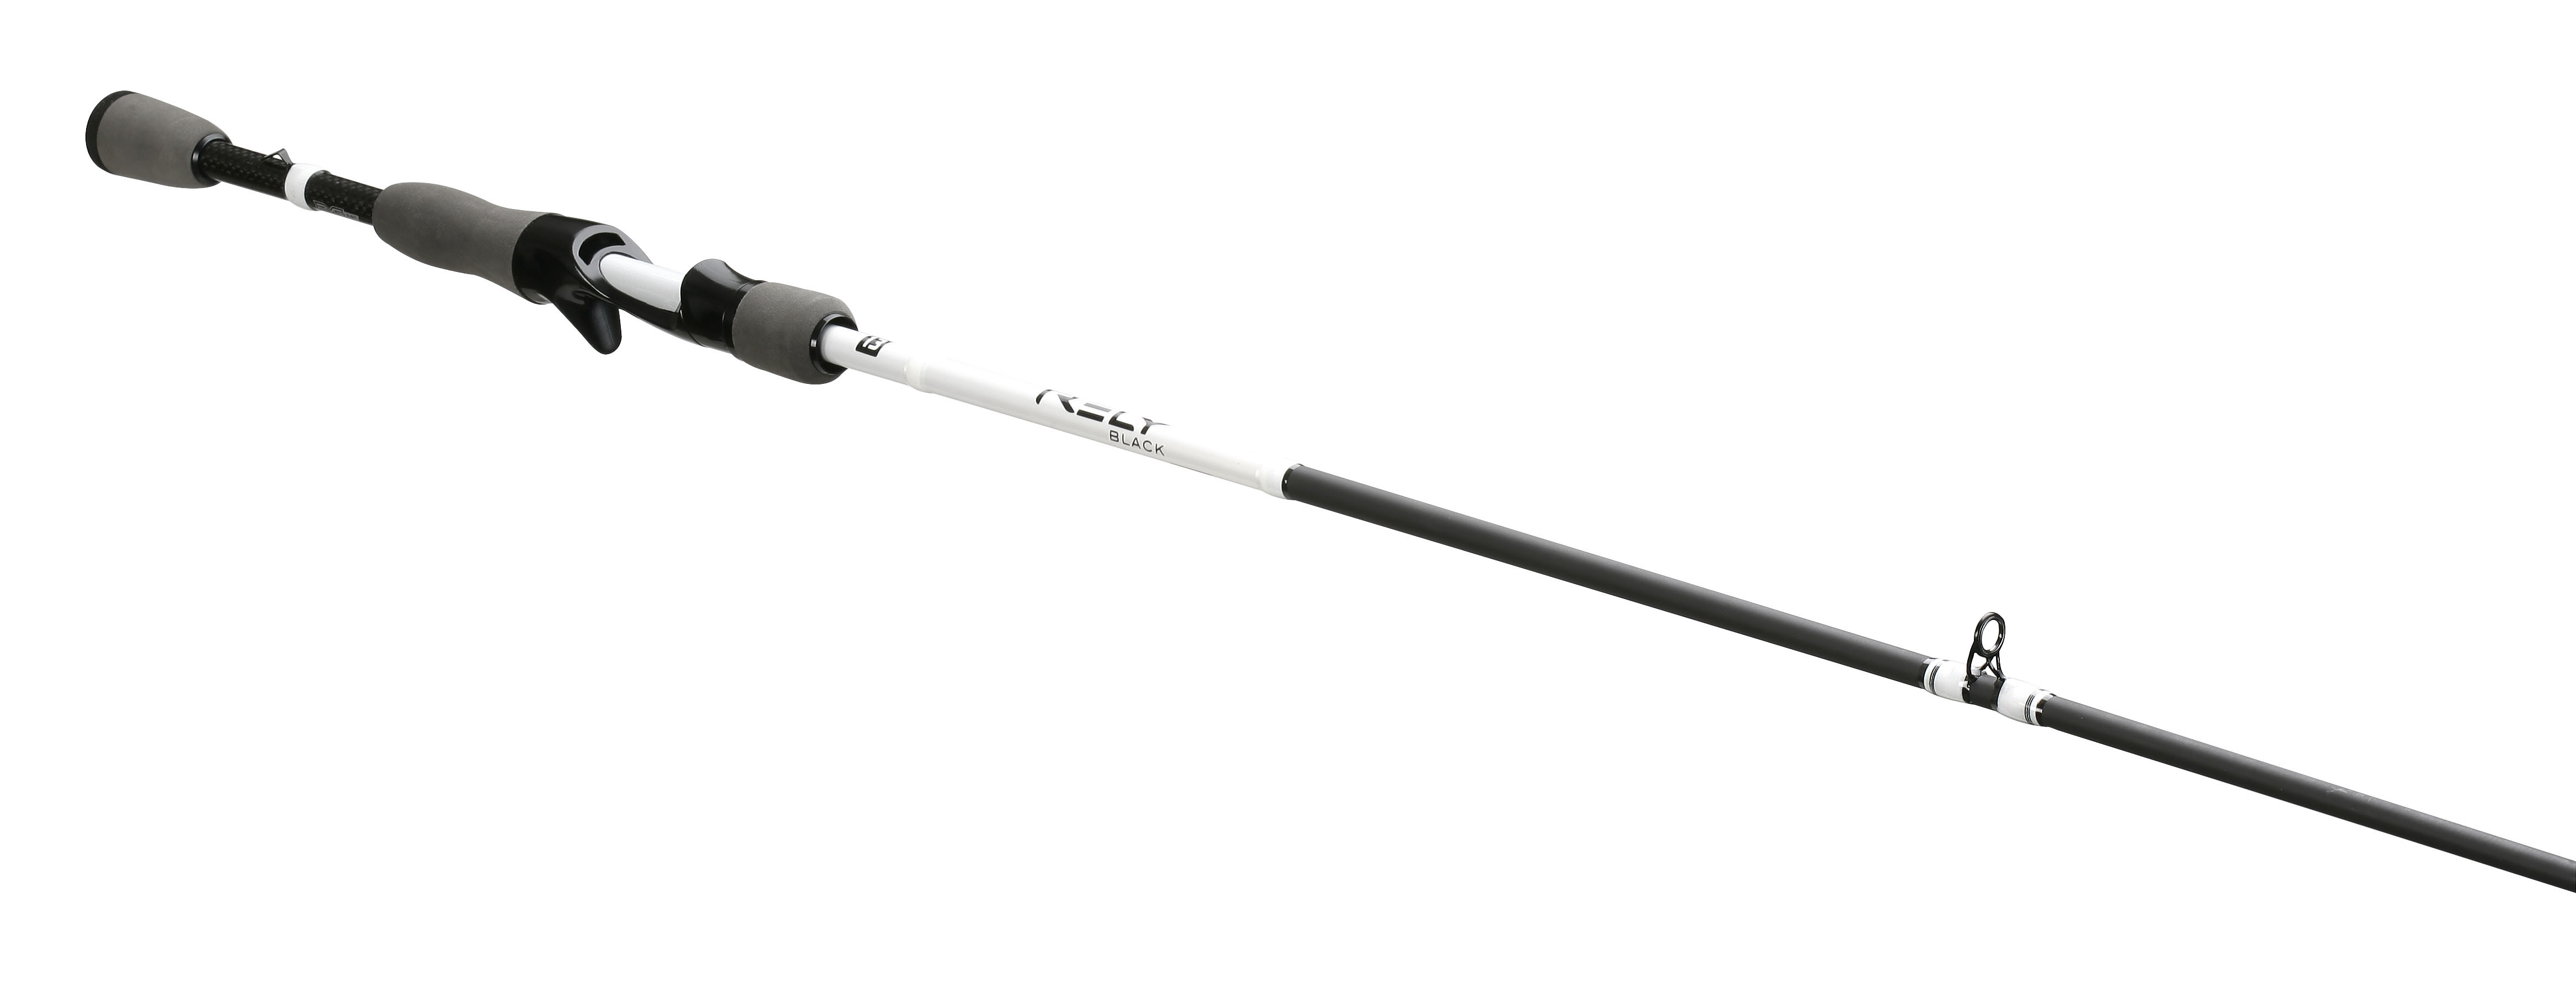 Buy fishing rods for sale online